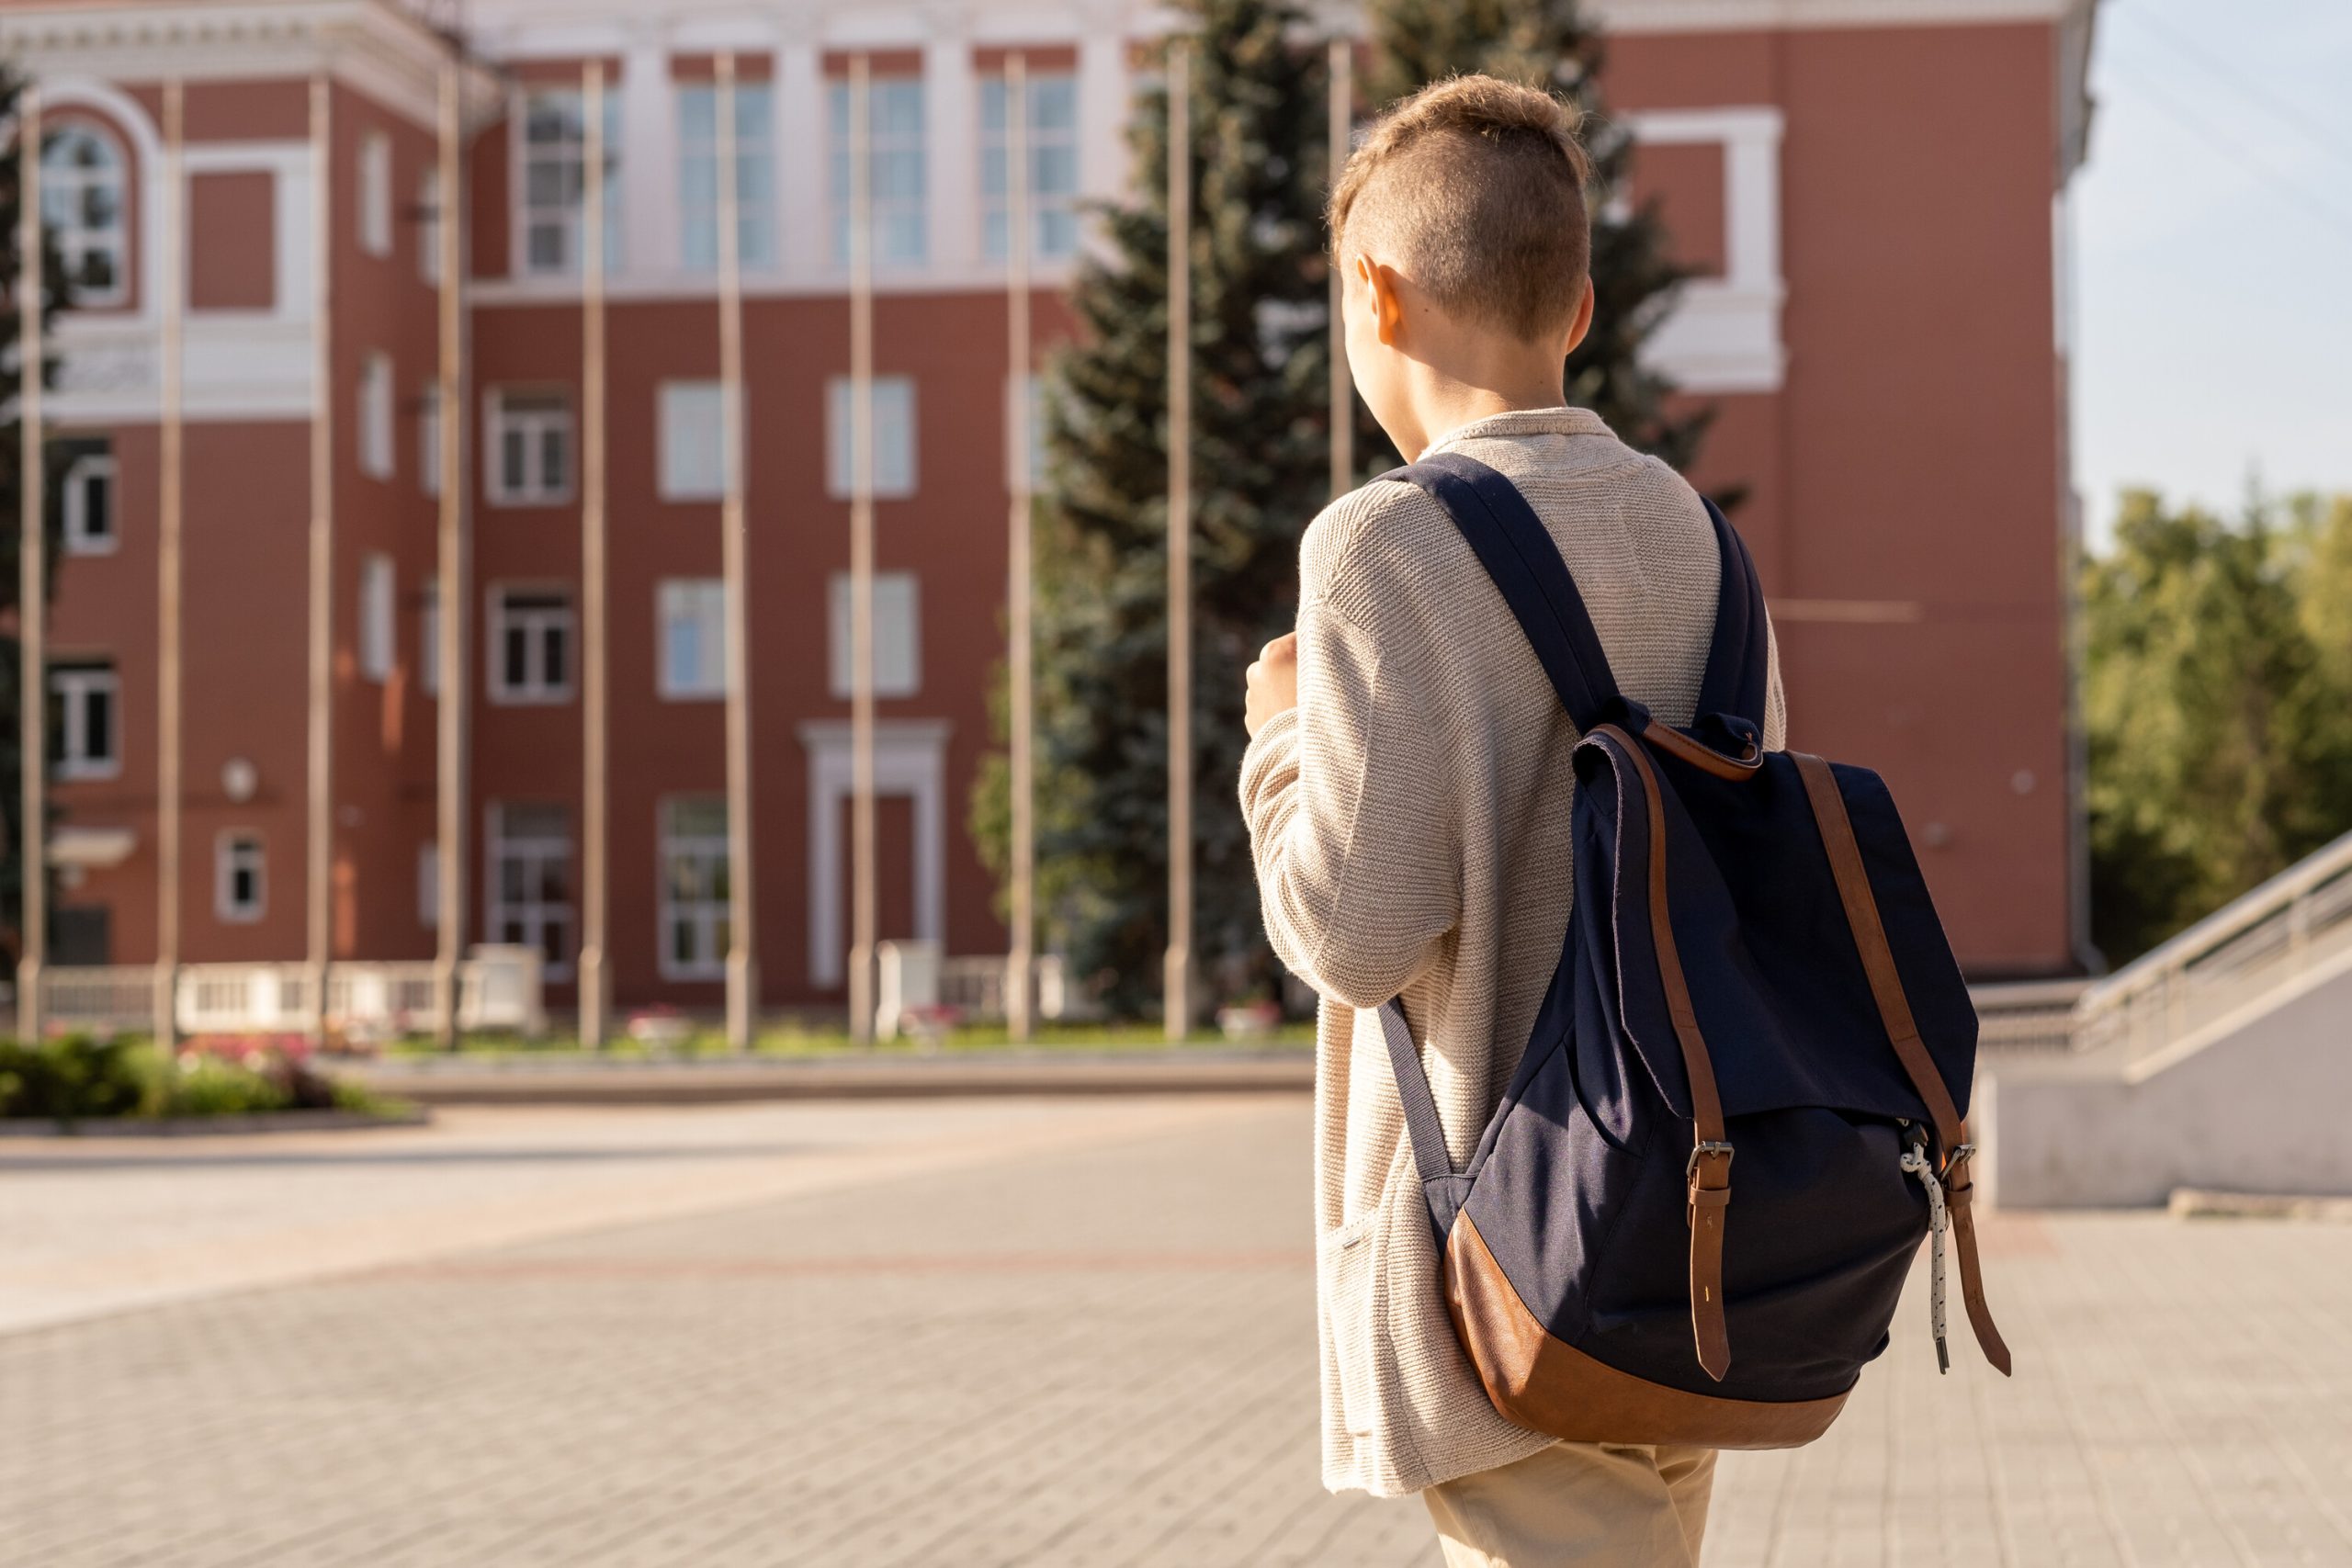 Youthful boy with a black backpack stands in front of a new school.